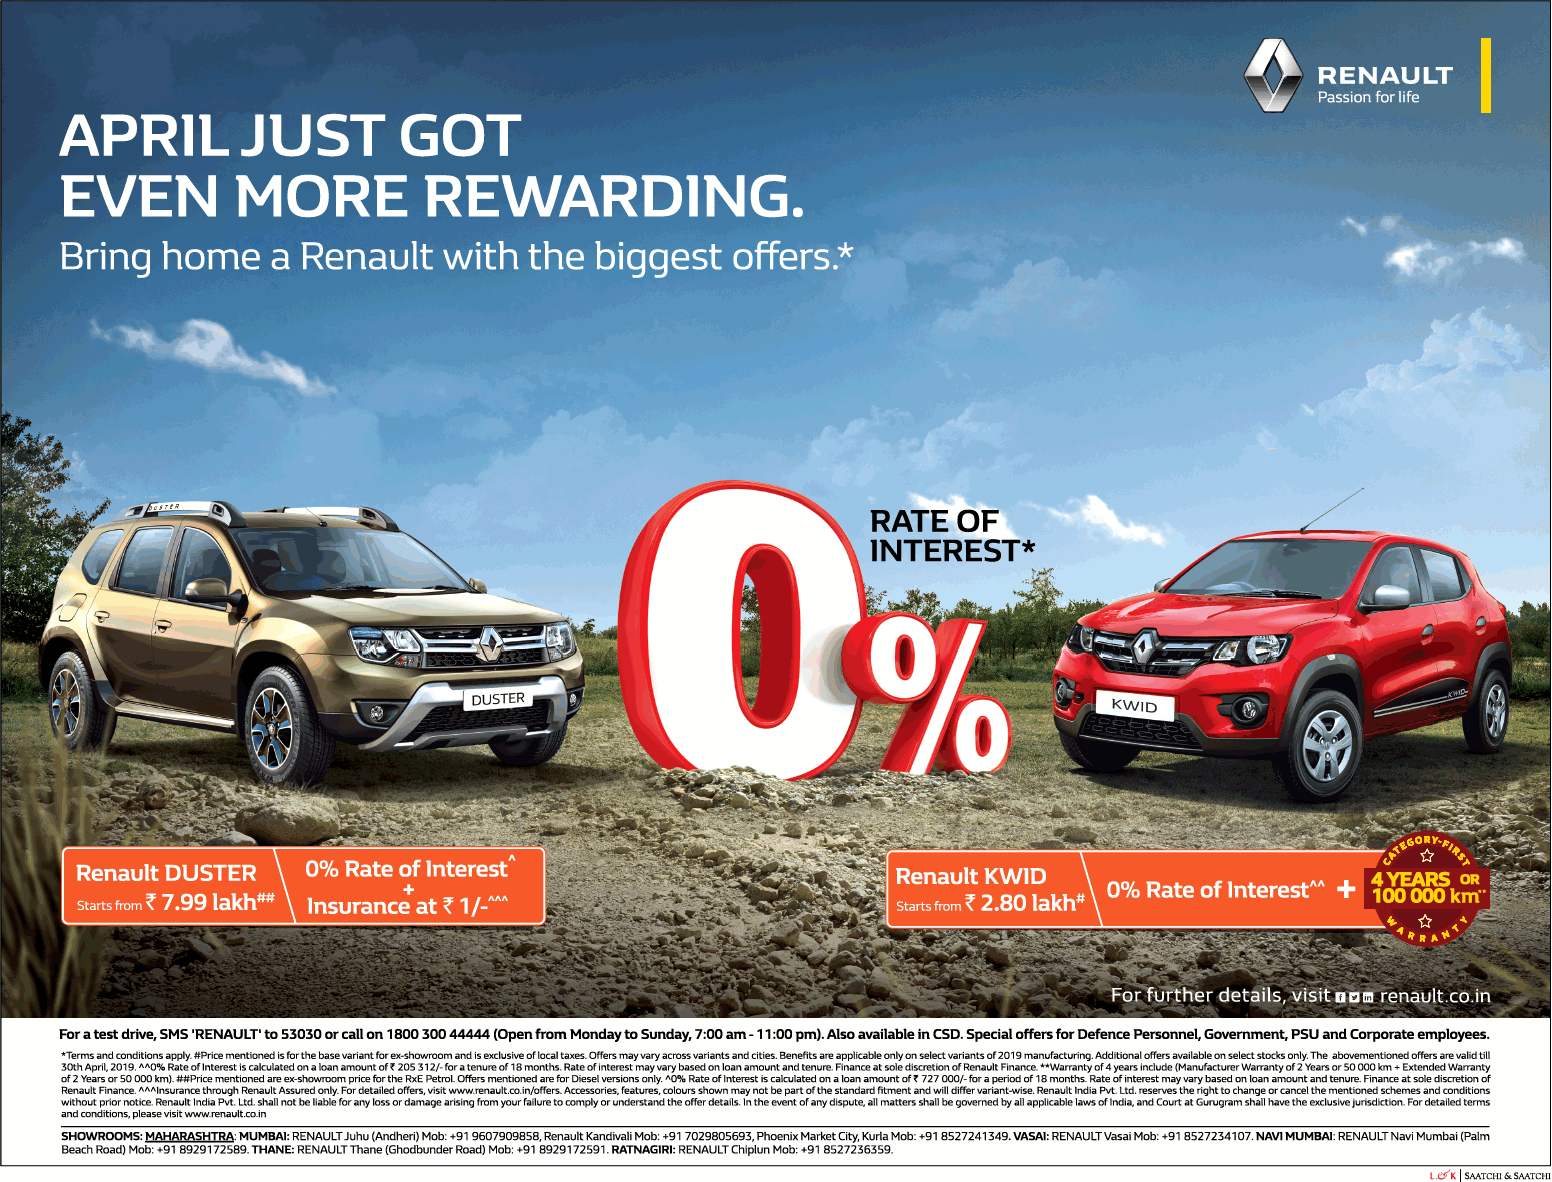 renault-cars-april-just-got-even-more-rewarding-rate-of-interest-0%-ad-bombay-times-05-04-2019.png